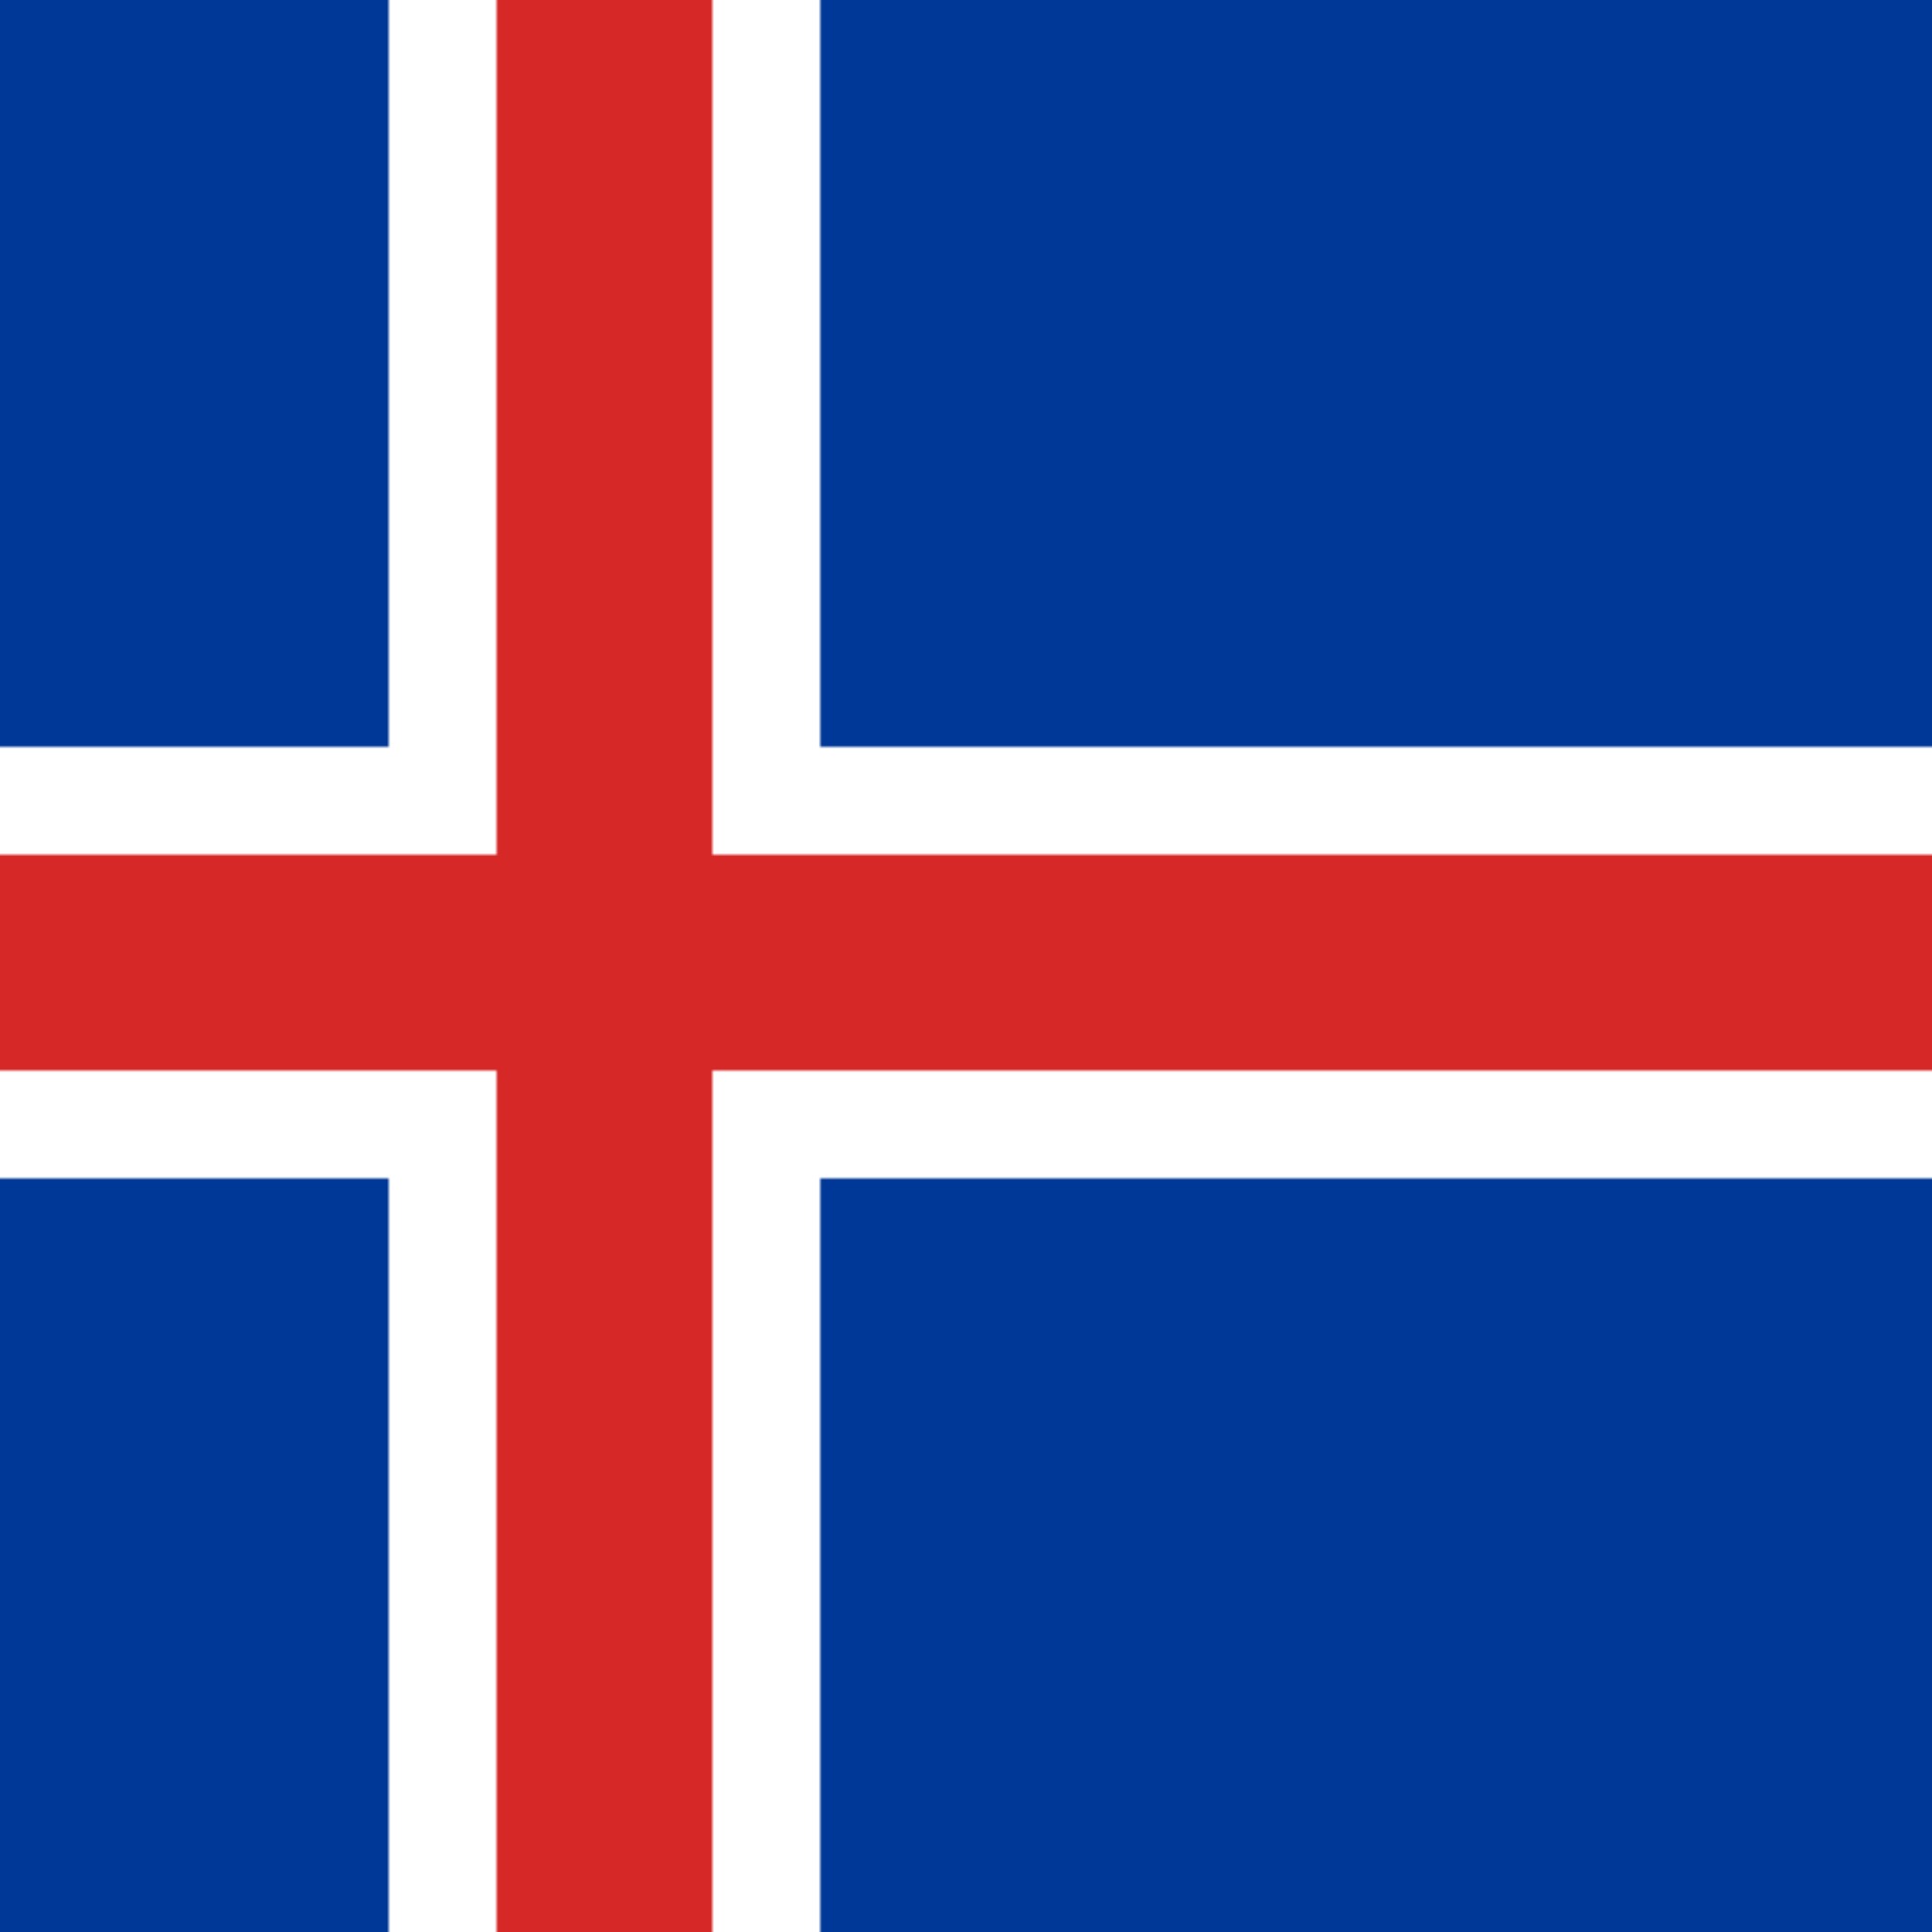 Honorary Consulate of Iceland (Valencia) 